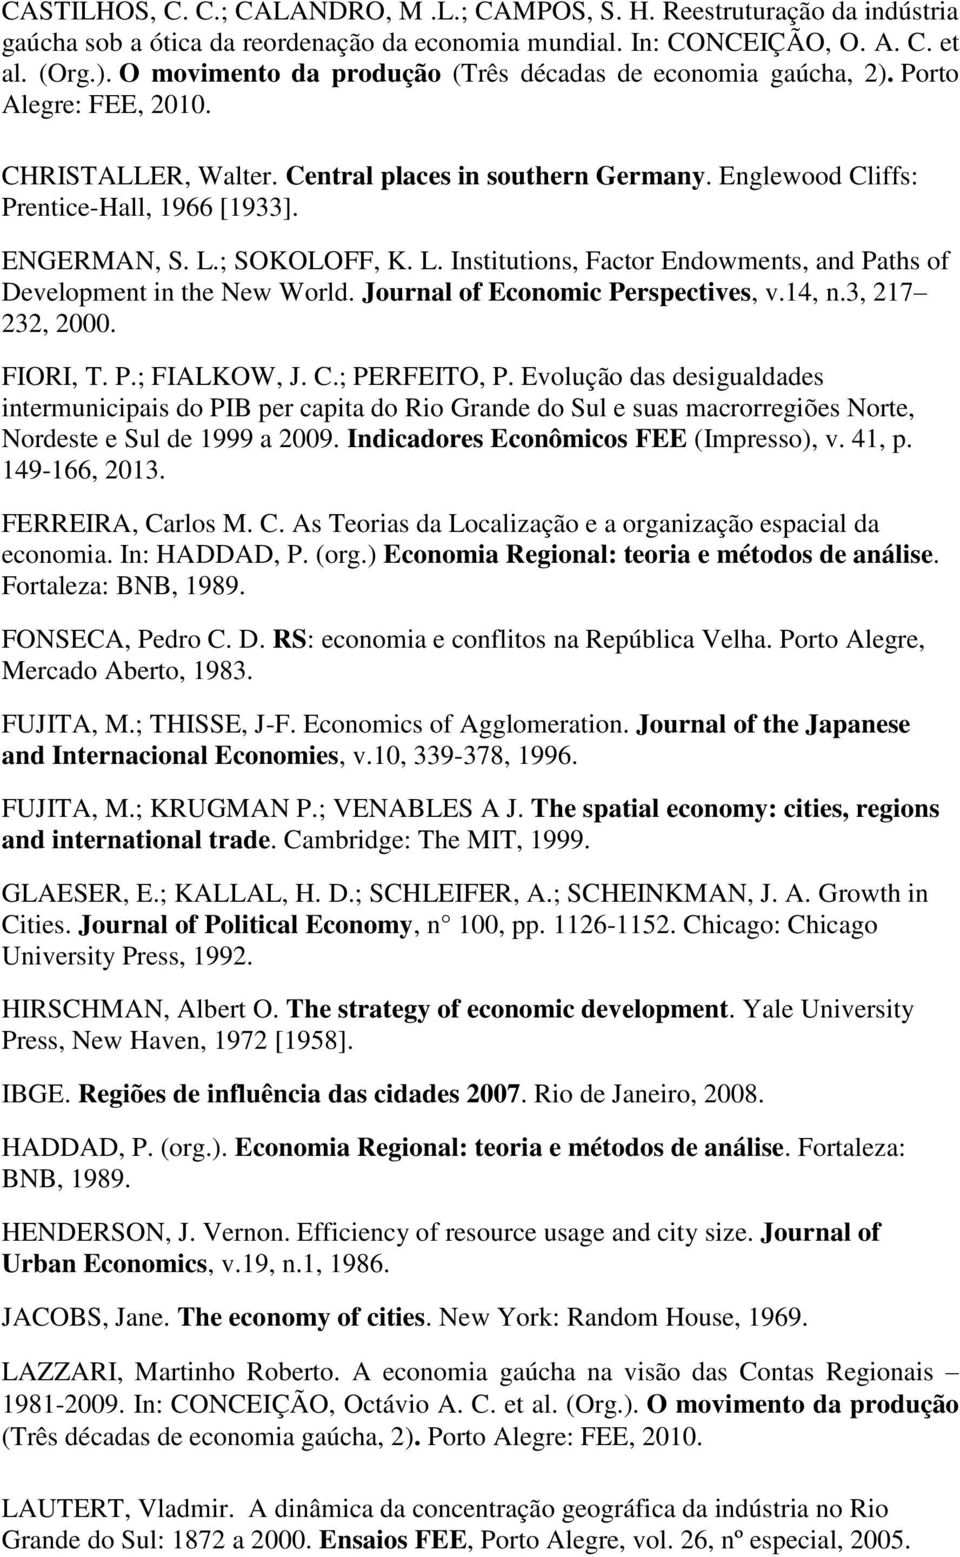 ENGERMAN, S. L.; SOKOLOFF, K. L. Institutions, Factor Endowments, and Paths of Development in the New World. Journal of Economic Perspectives, v.14, n.3, 217 232, 2000. FIORI, T. P.; FIALKOW, J. C.